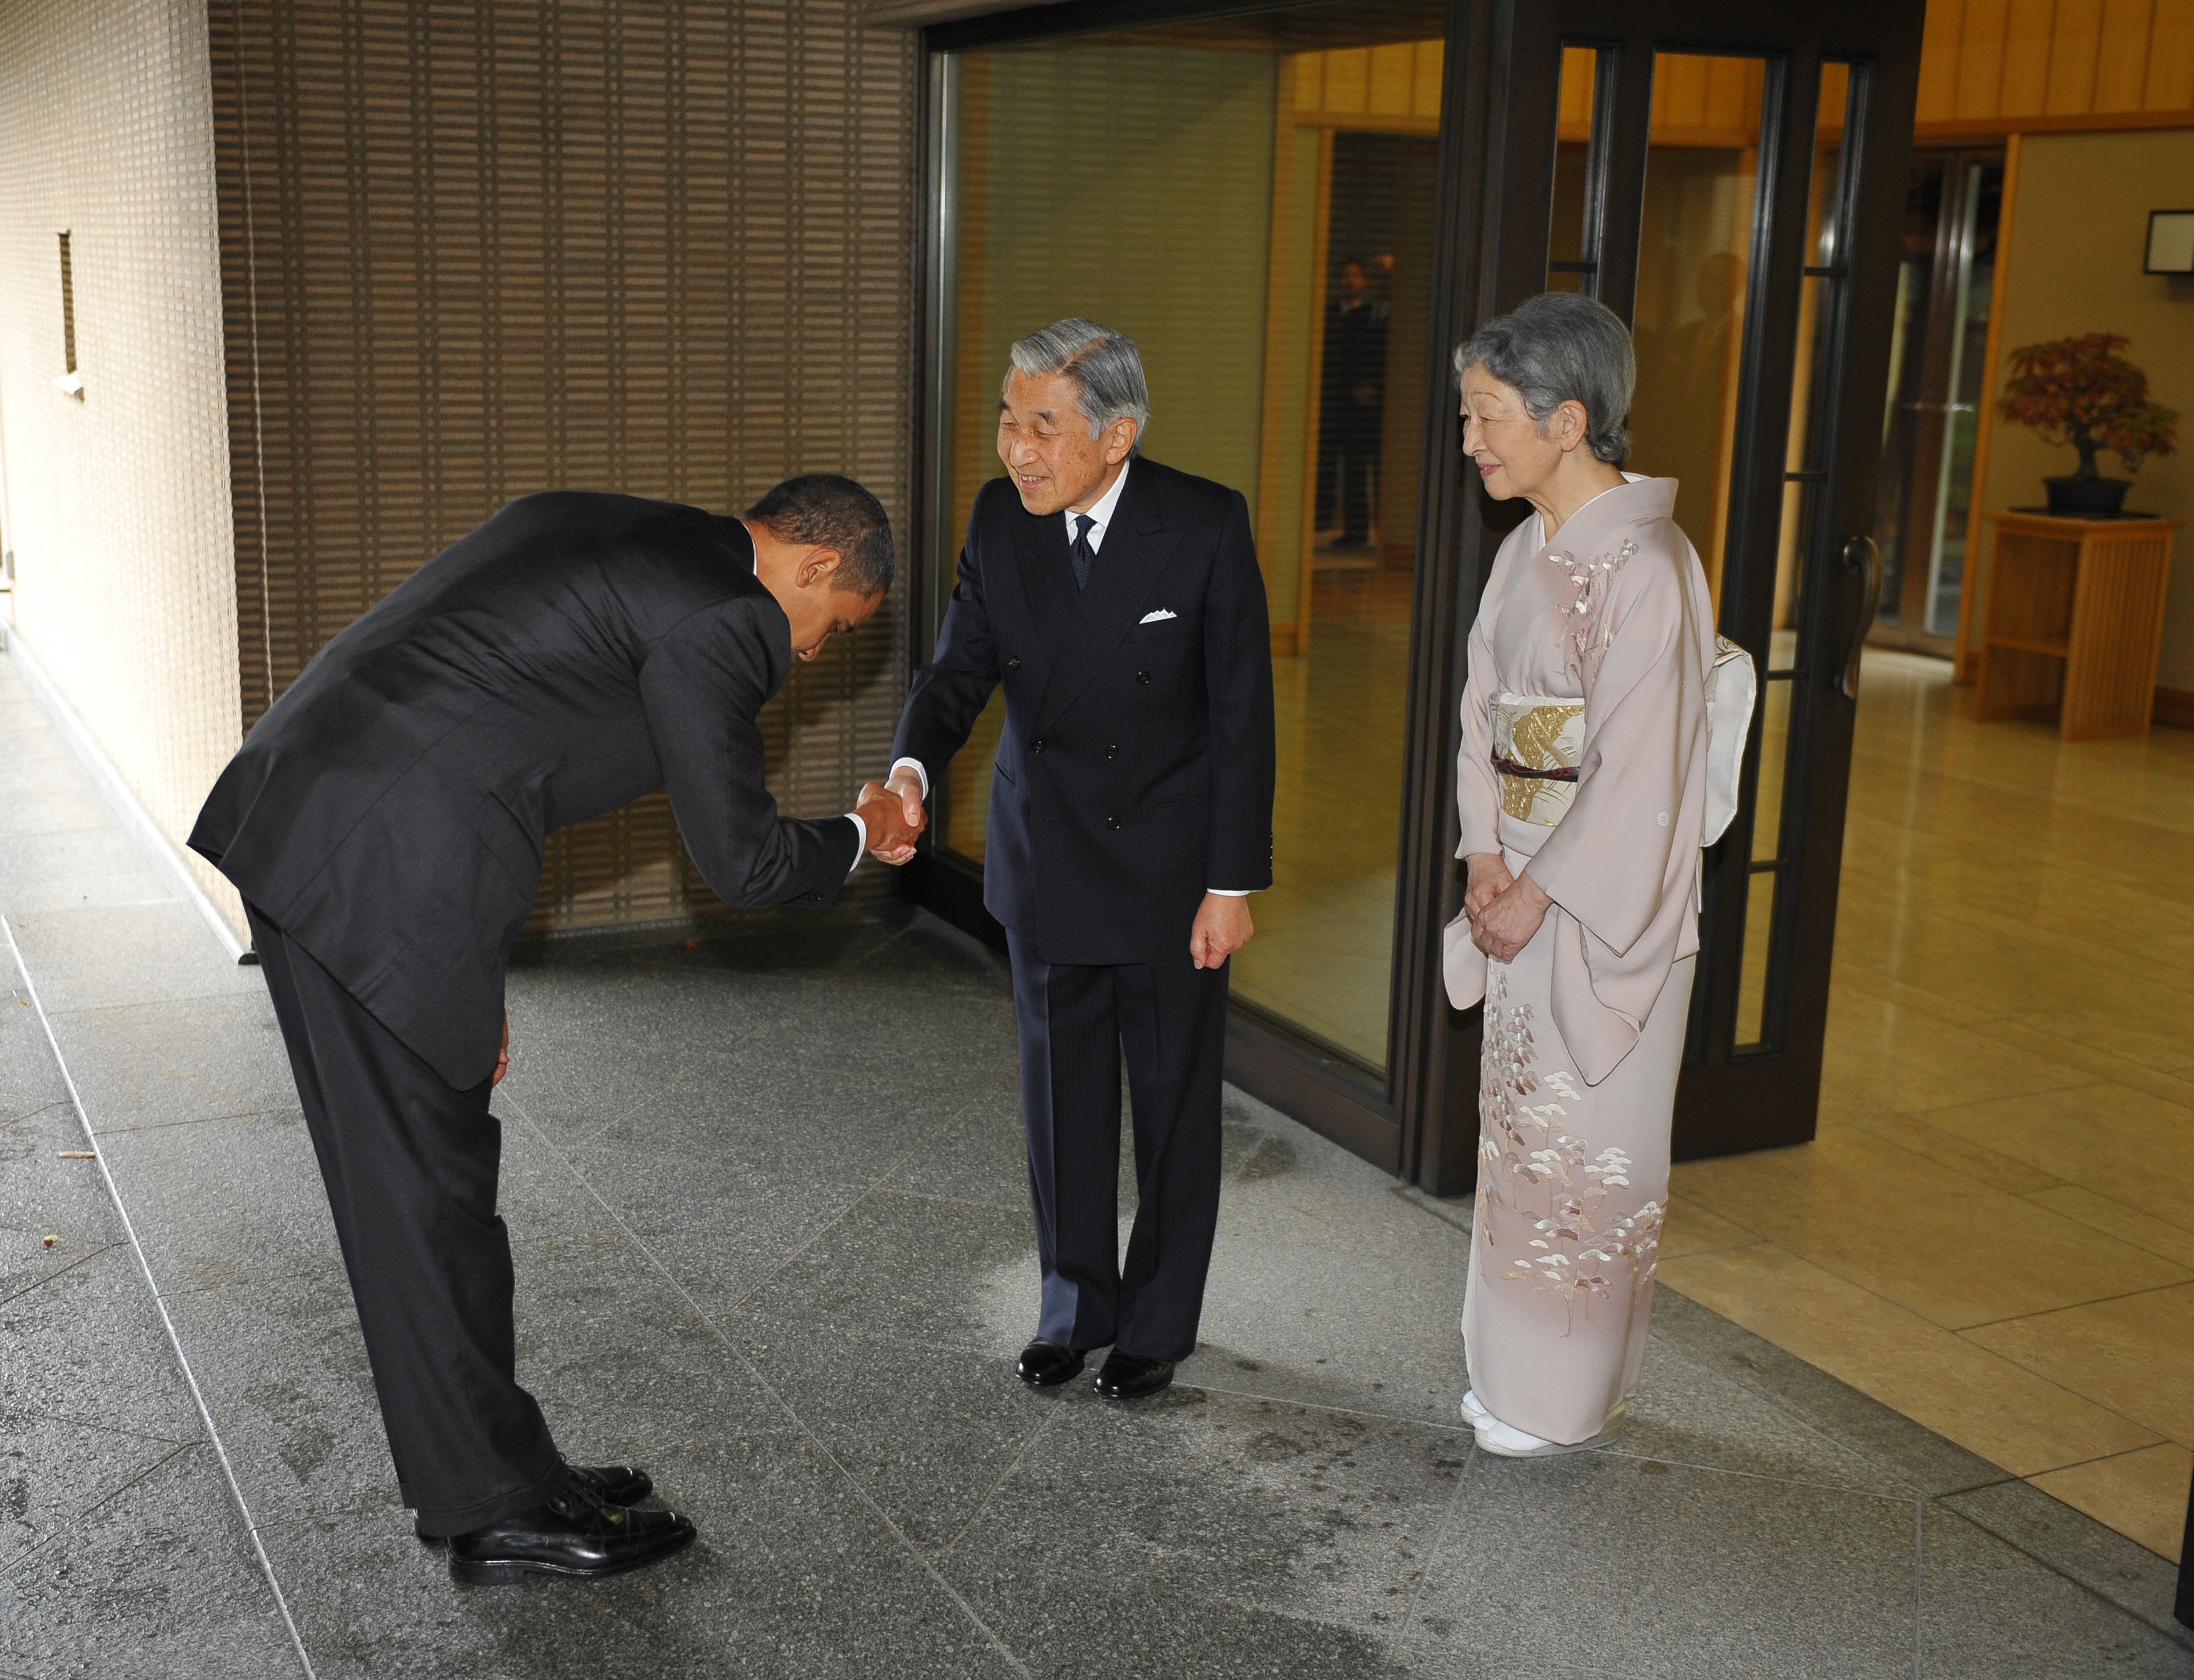 President Barack Obama bows as he shakes hands with Japanese Emperor Akihito and as Empress Michiko looks on upon Obama's arrival at the Imperial Palace in Tokyo on November 14, 2009.